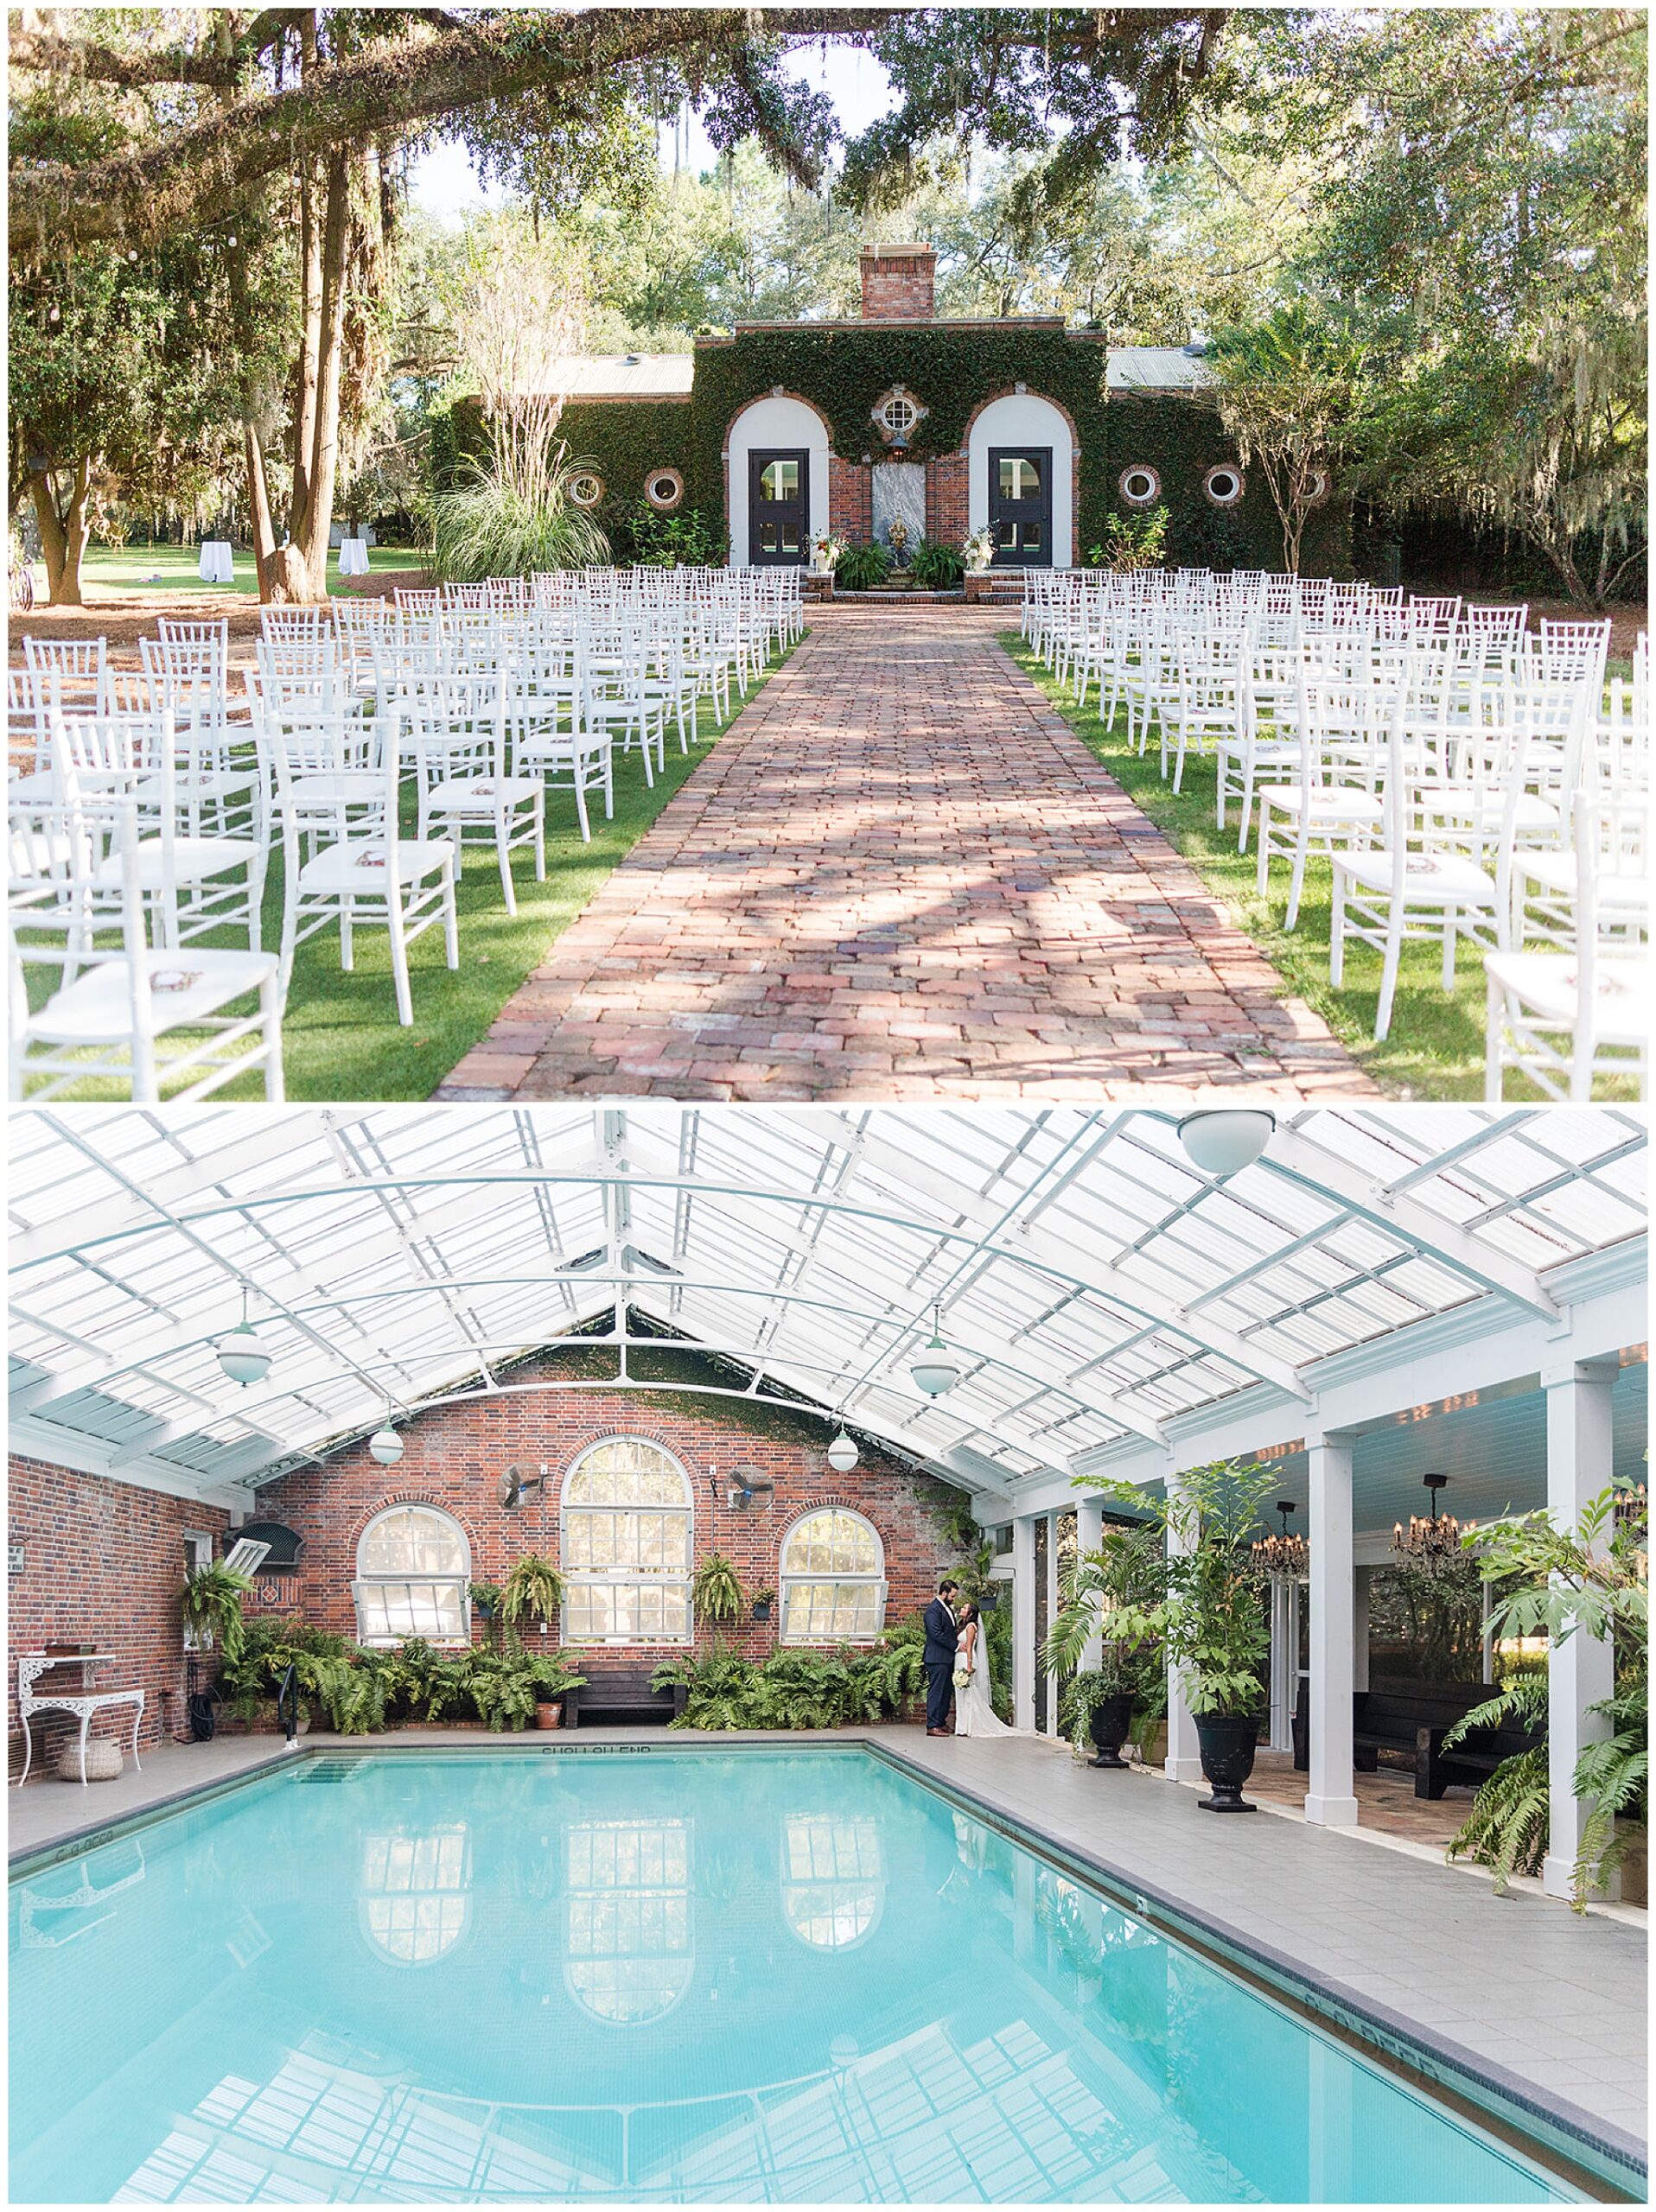 An empty wedding ceremony set up outside under oak trees in front of a brick building covered in ivy with white chairs